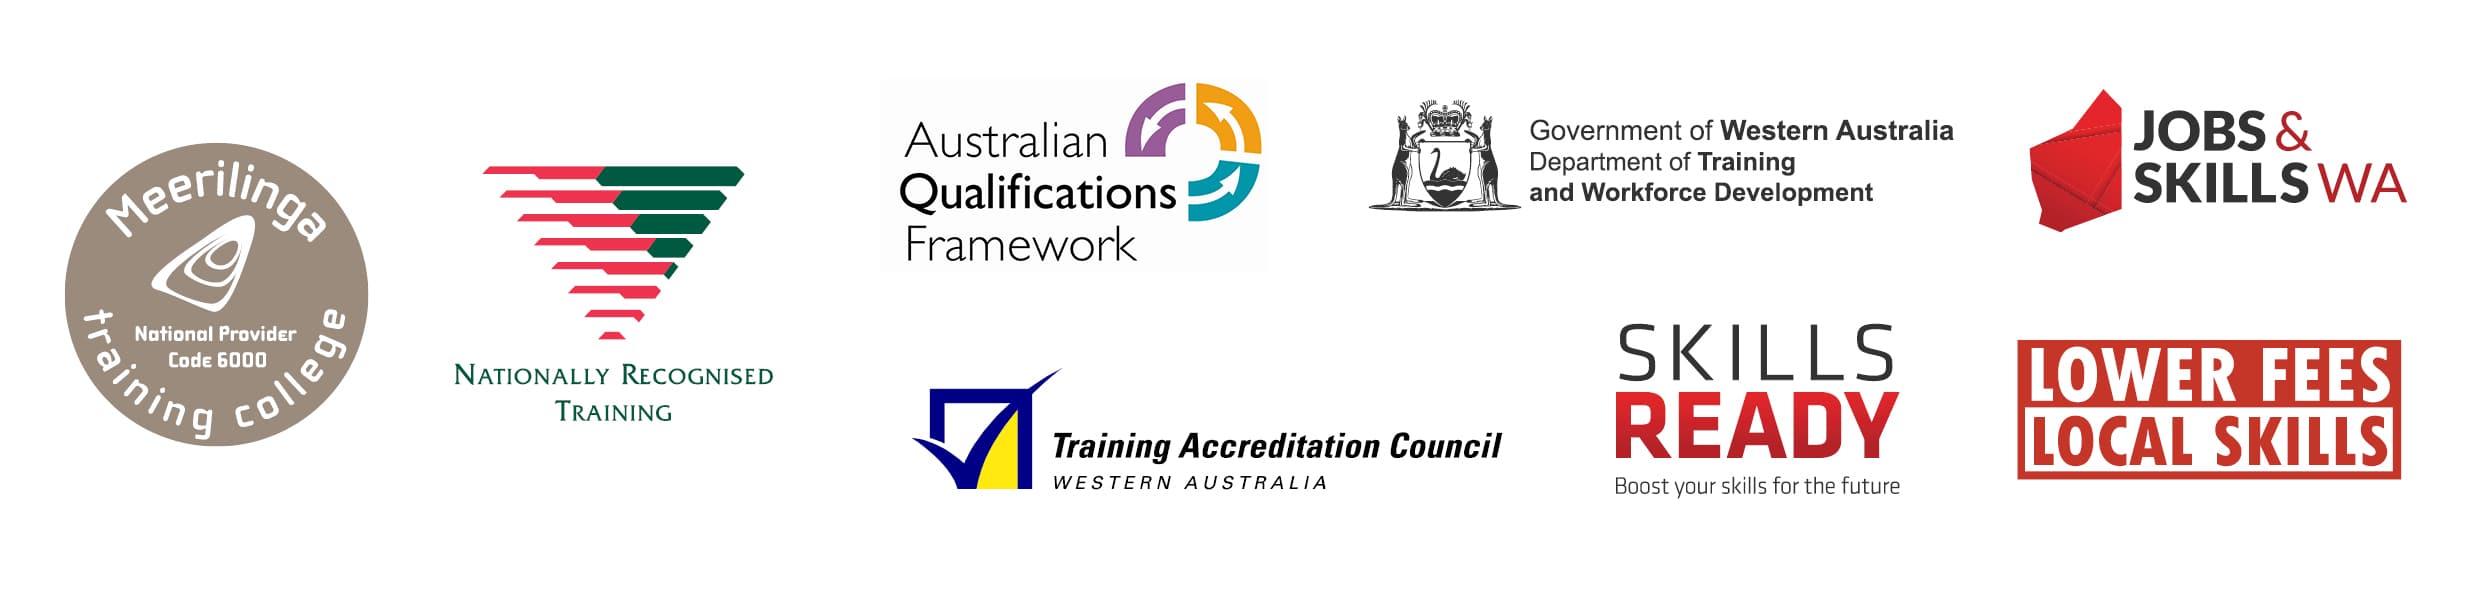 Meerilinga Training College provides Nationally Recognised Training course under the Australian Qualifications Framework, Training Accreditations Council, and the Western Australian Department of Training and Workforce Development, and partners with Skills Ready to provide a Job Ready Course. Lower Fees Local Skills initiative made possible by Jobs and Skills WA